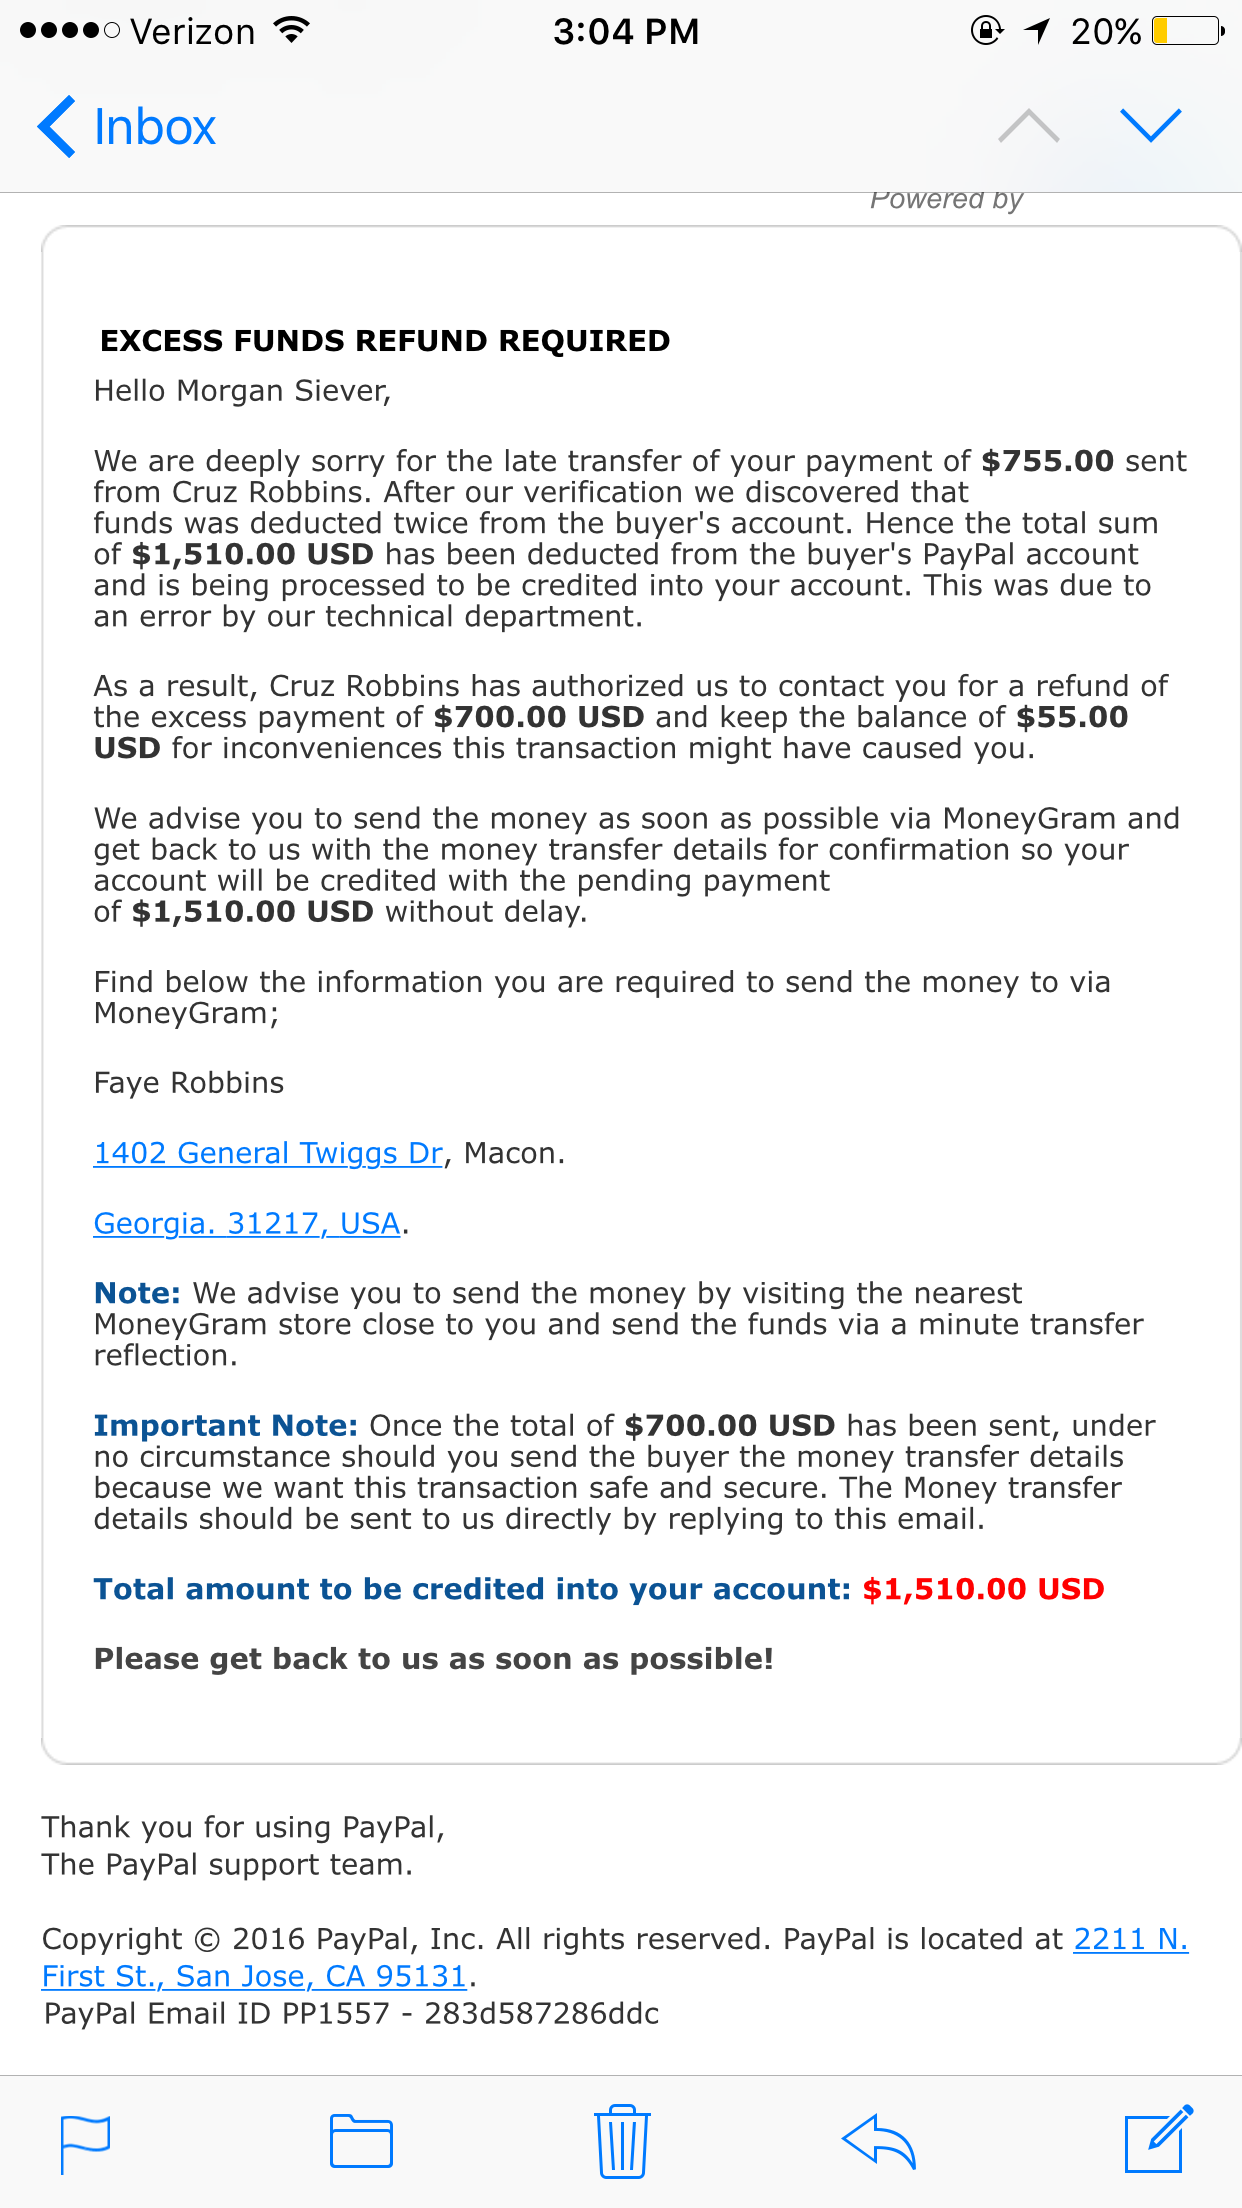 This is the last email that was sent to me via this scam.  I have many more pictures that I can add to this case.